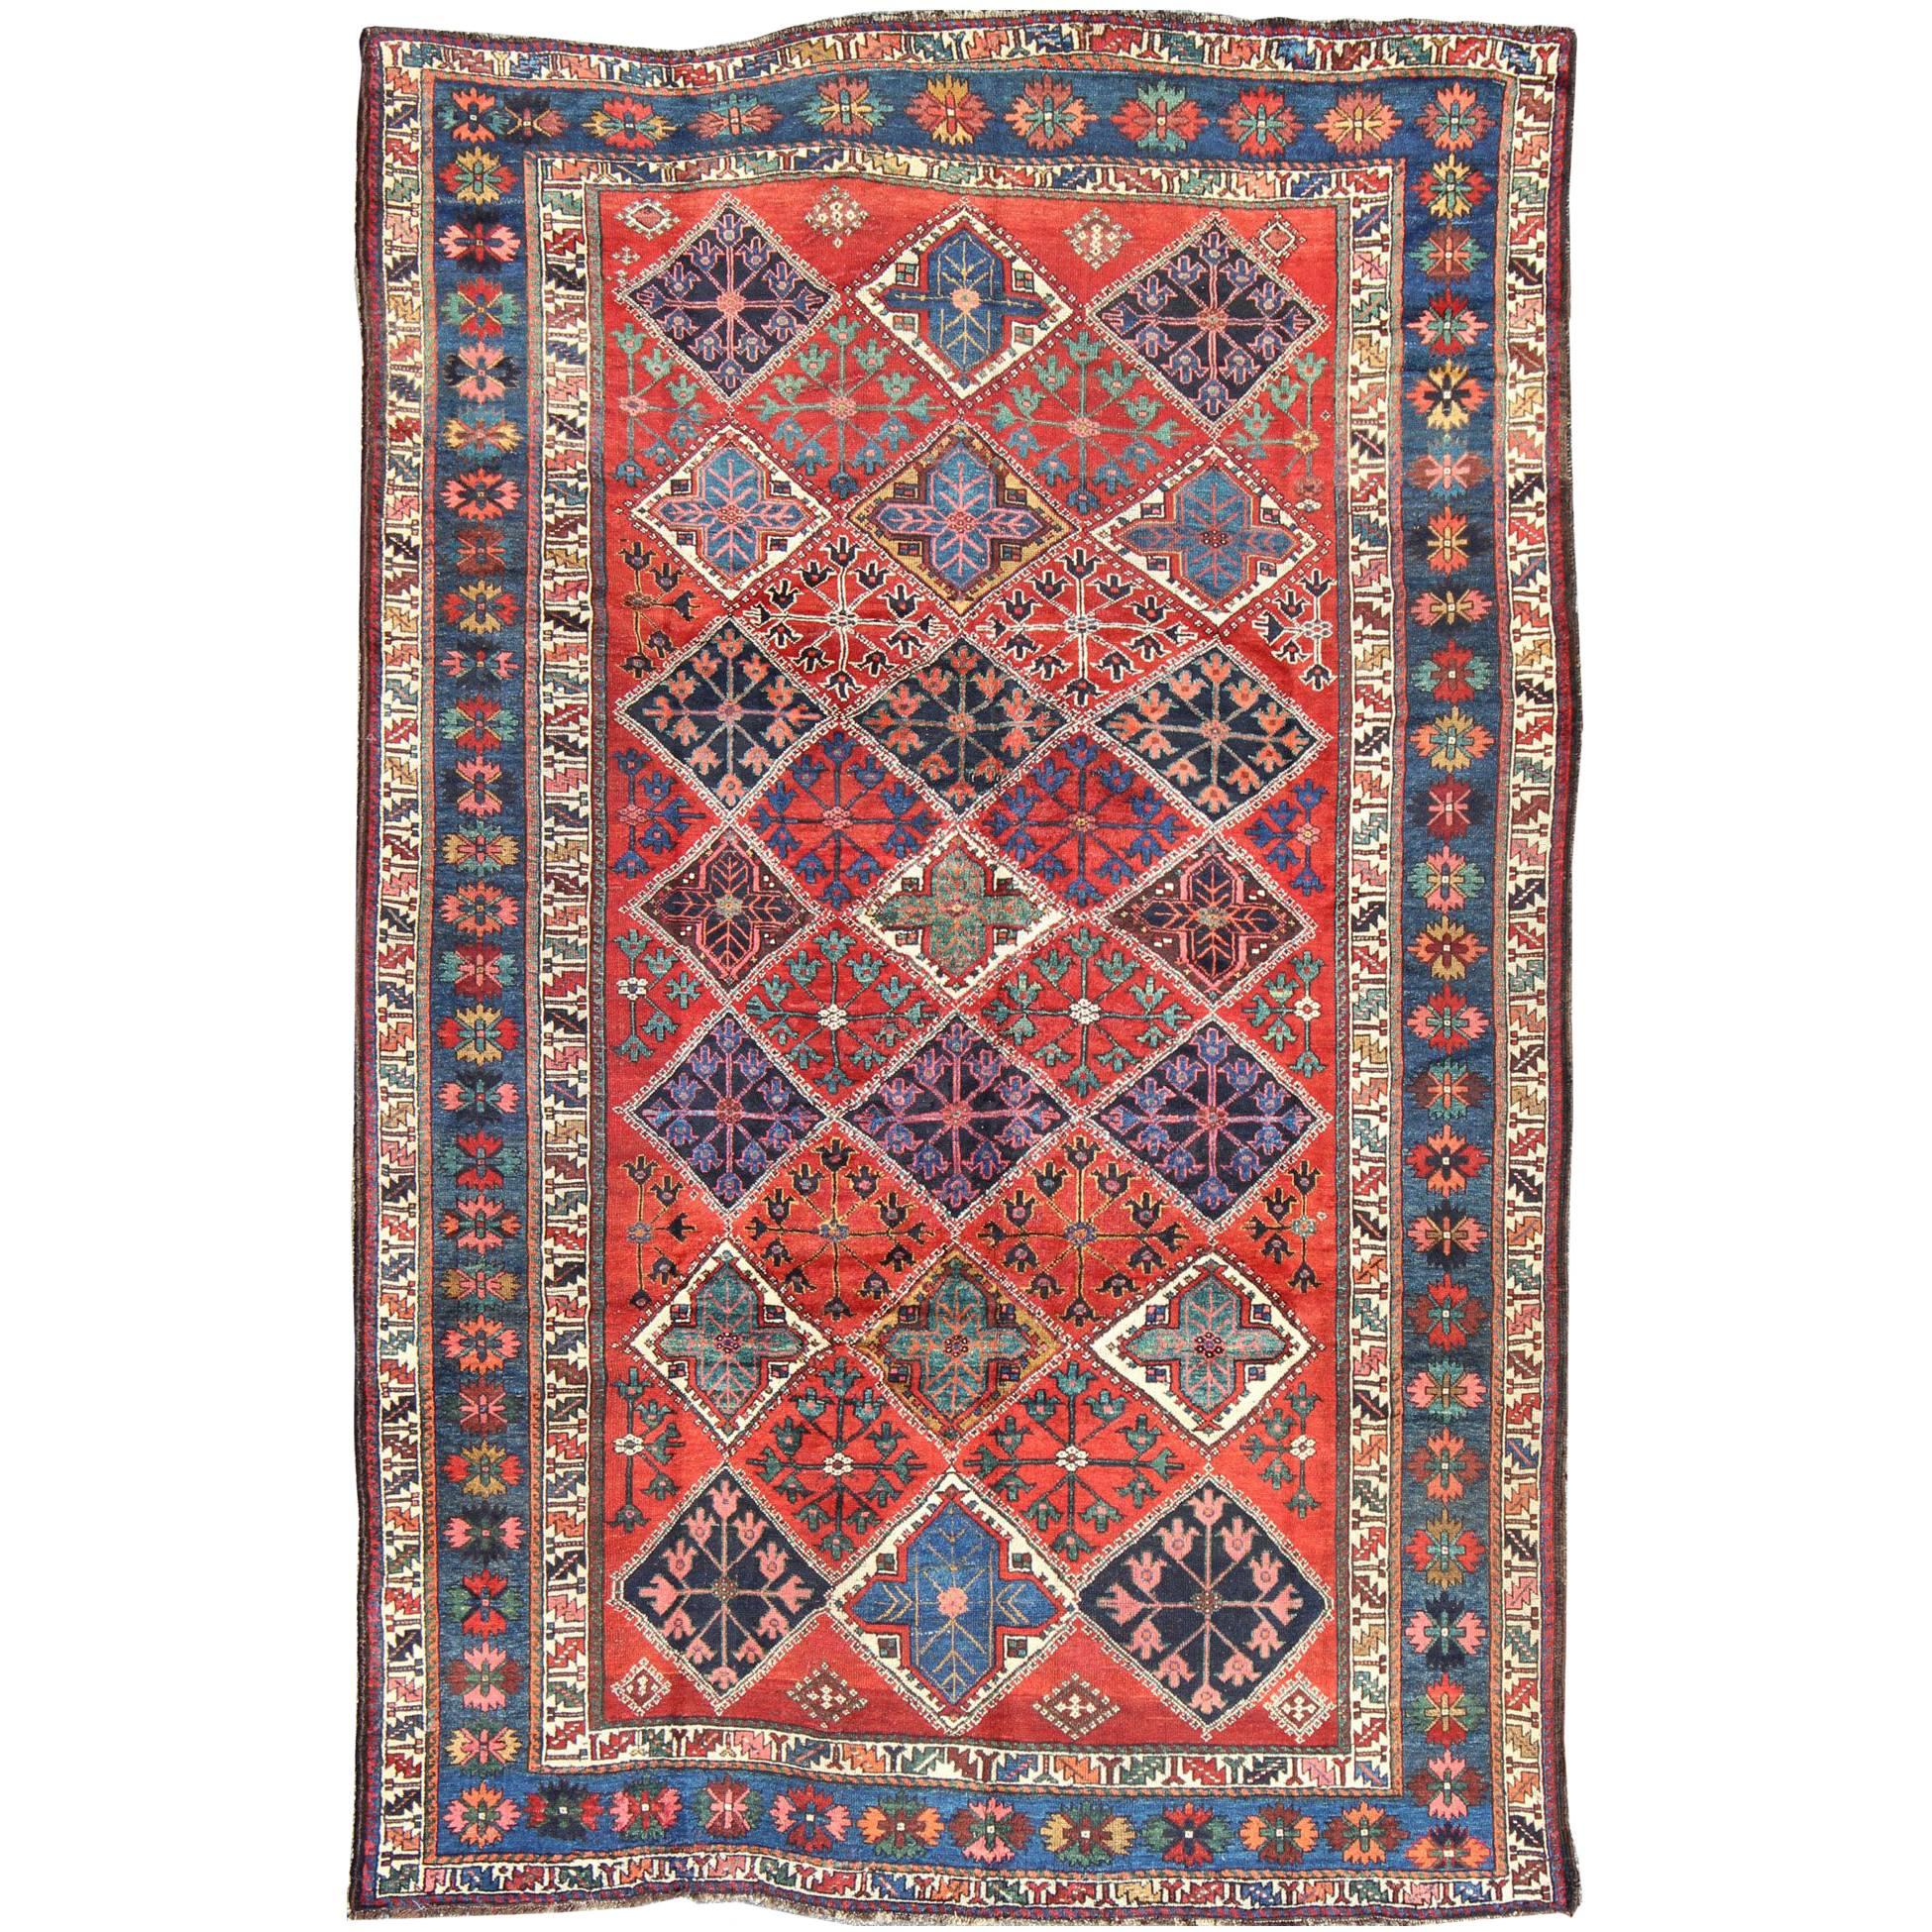 Antique Persian Qashqai Rug with Tulips, Diamond Patterns and Star Motifs For Sale